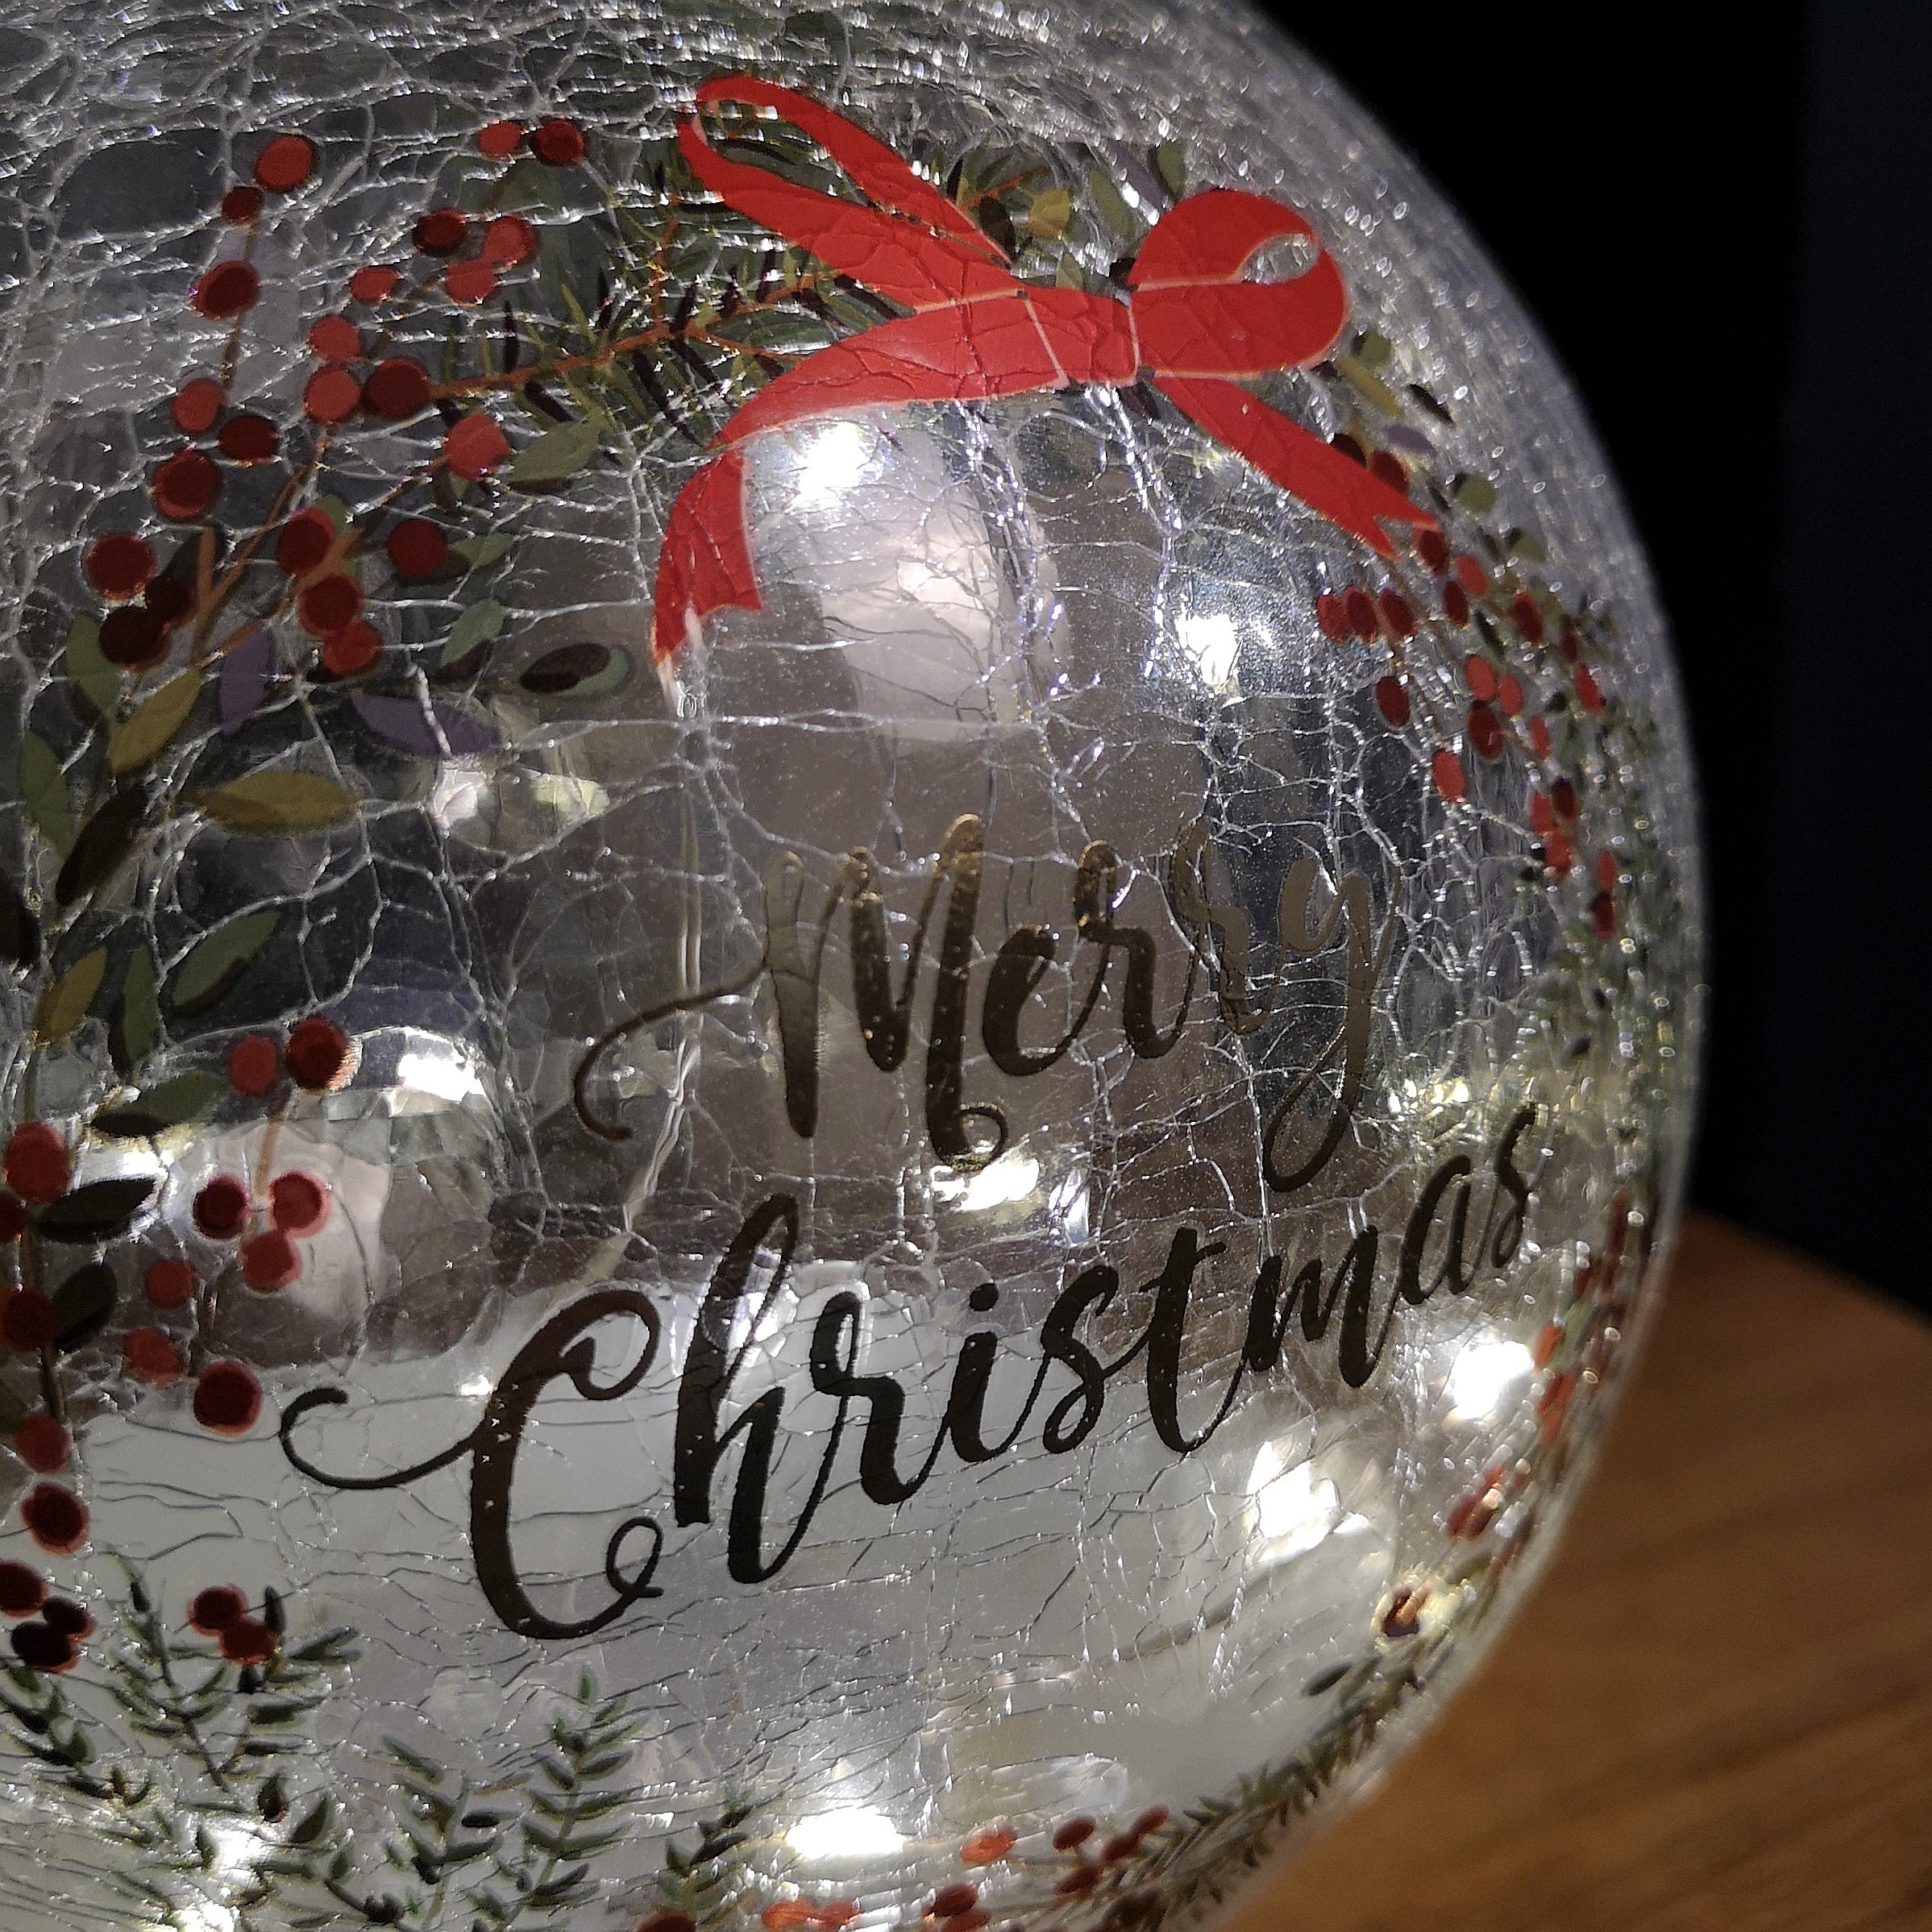 20cm Battery Operated Warm White LED Crackle Effect Ball Christmas Decoration with Merry Christmas